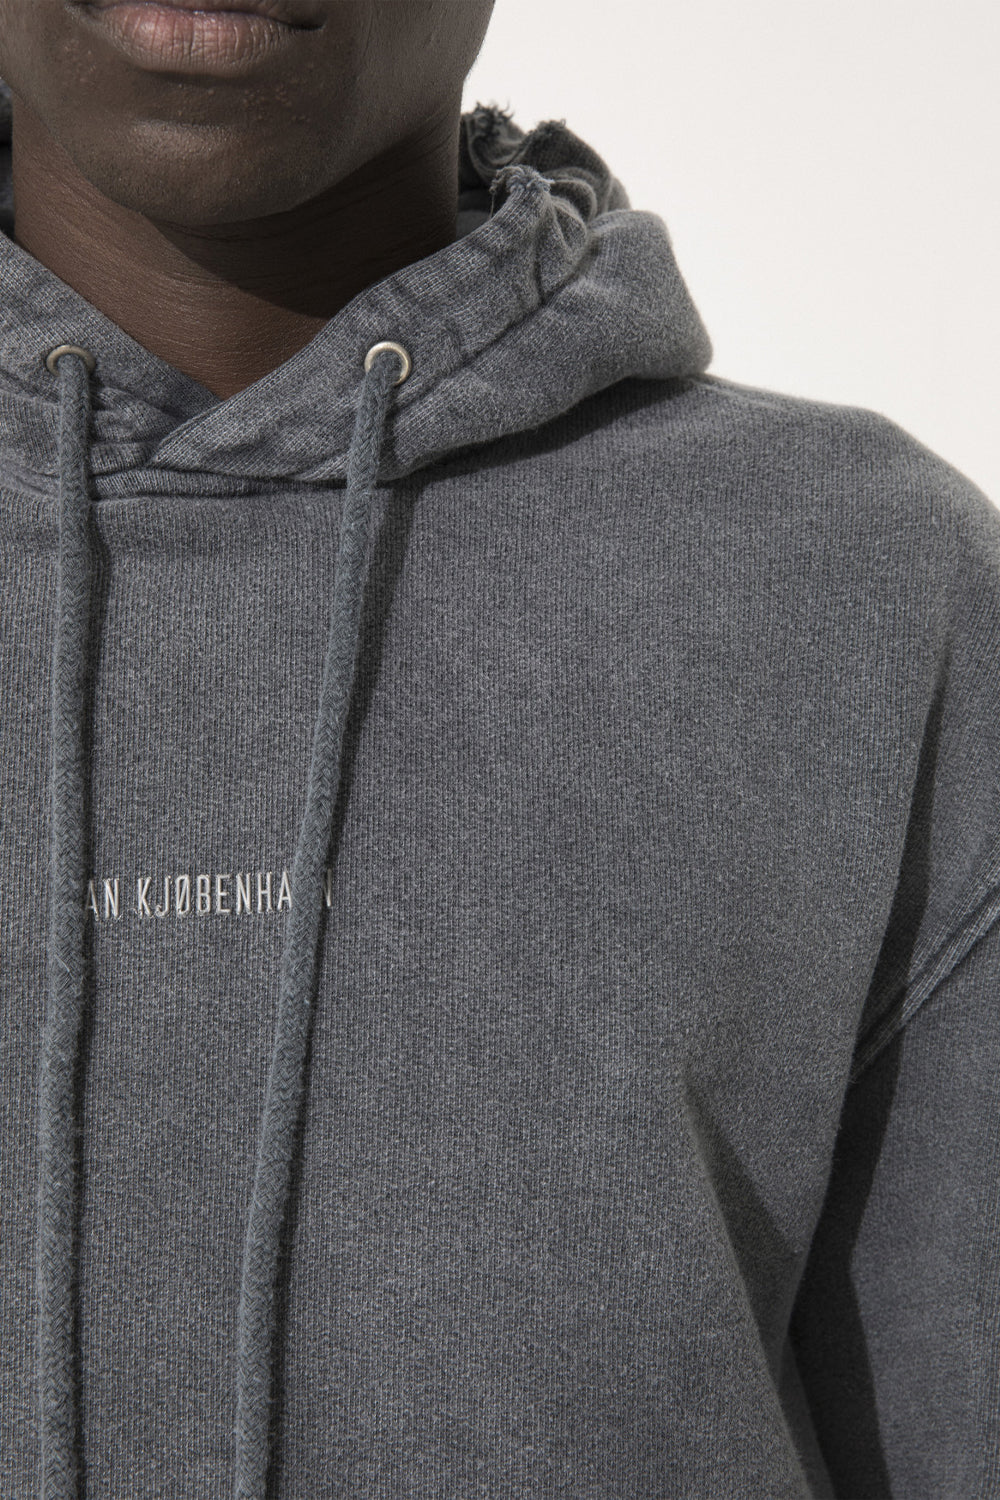 Buy the Han Kjobenhavn Distressed Logo Hoodie in Grey at Intro. Spend £50 for free UK delivery. Official stockists. We ship worldwide.